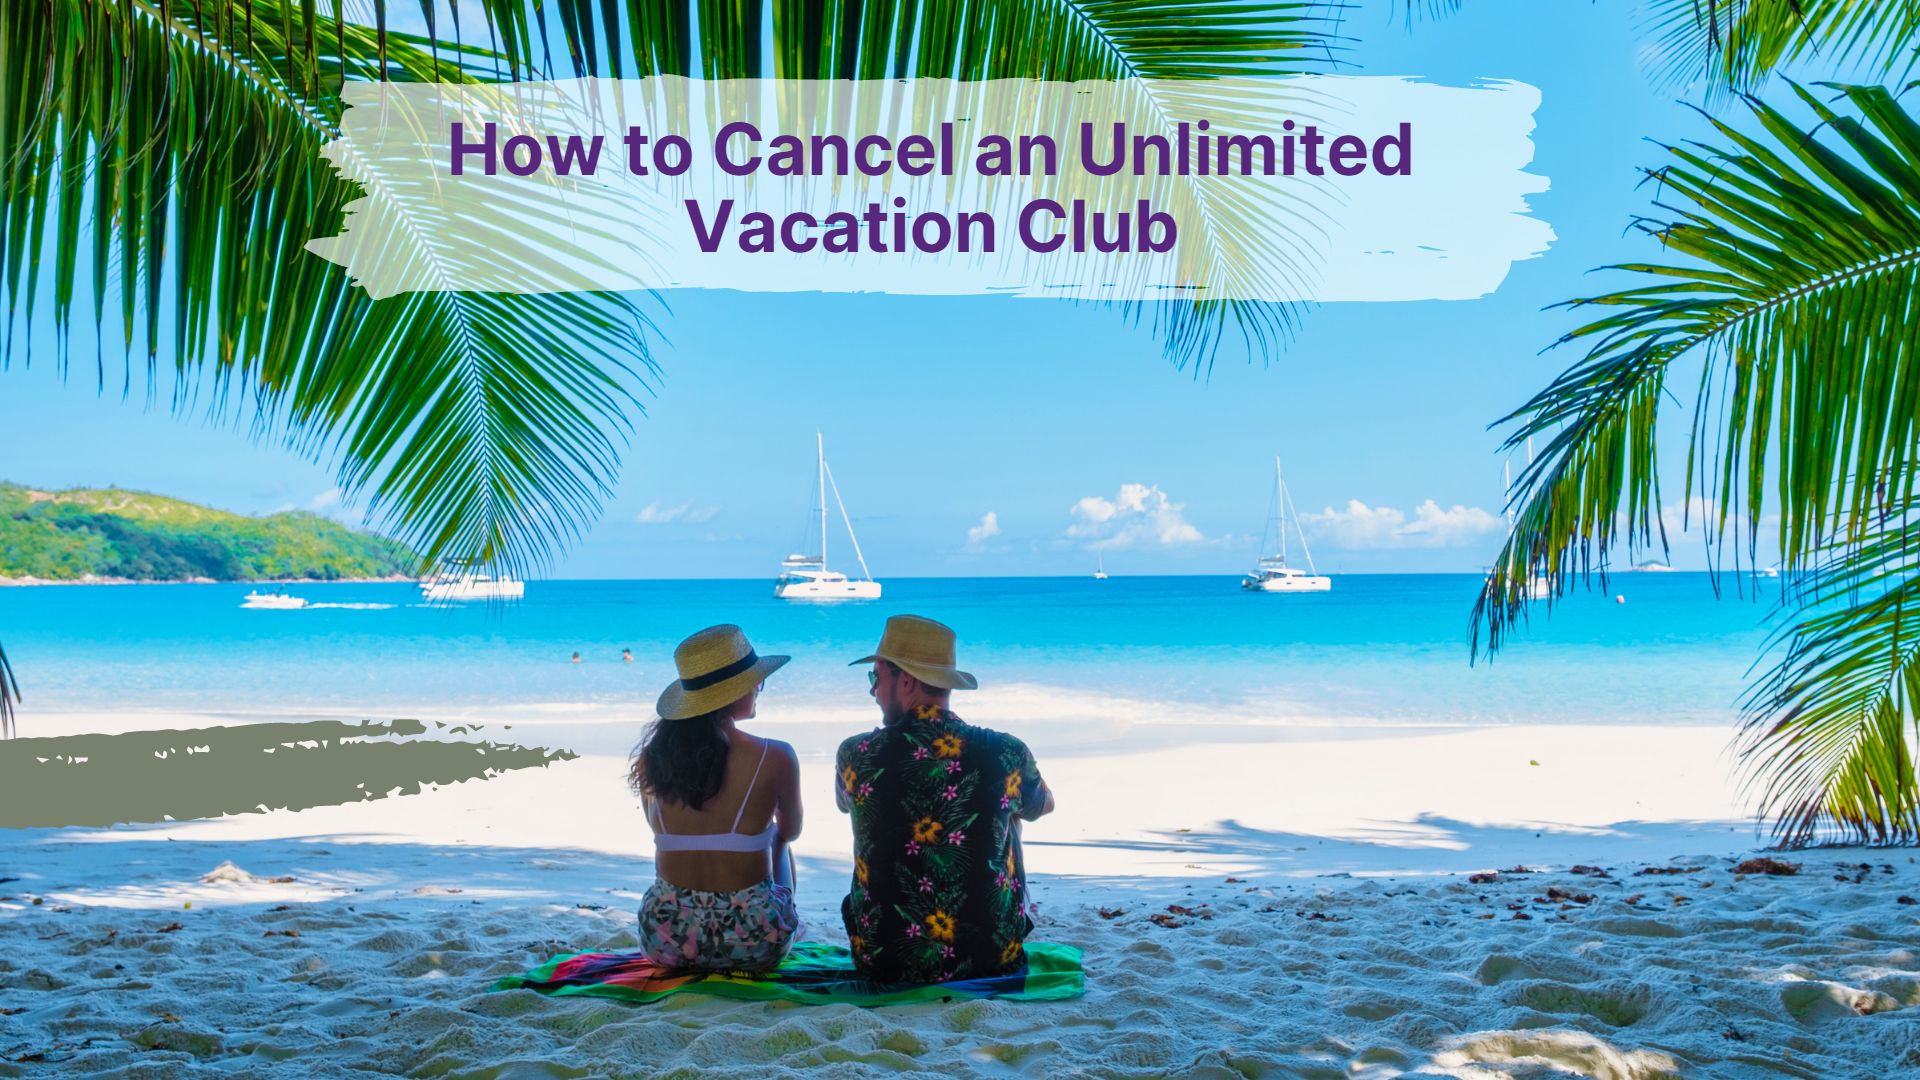 How to Cancel an Unlimited Vacation Club